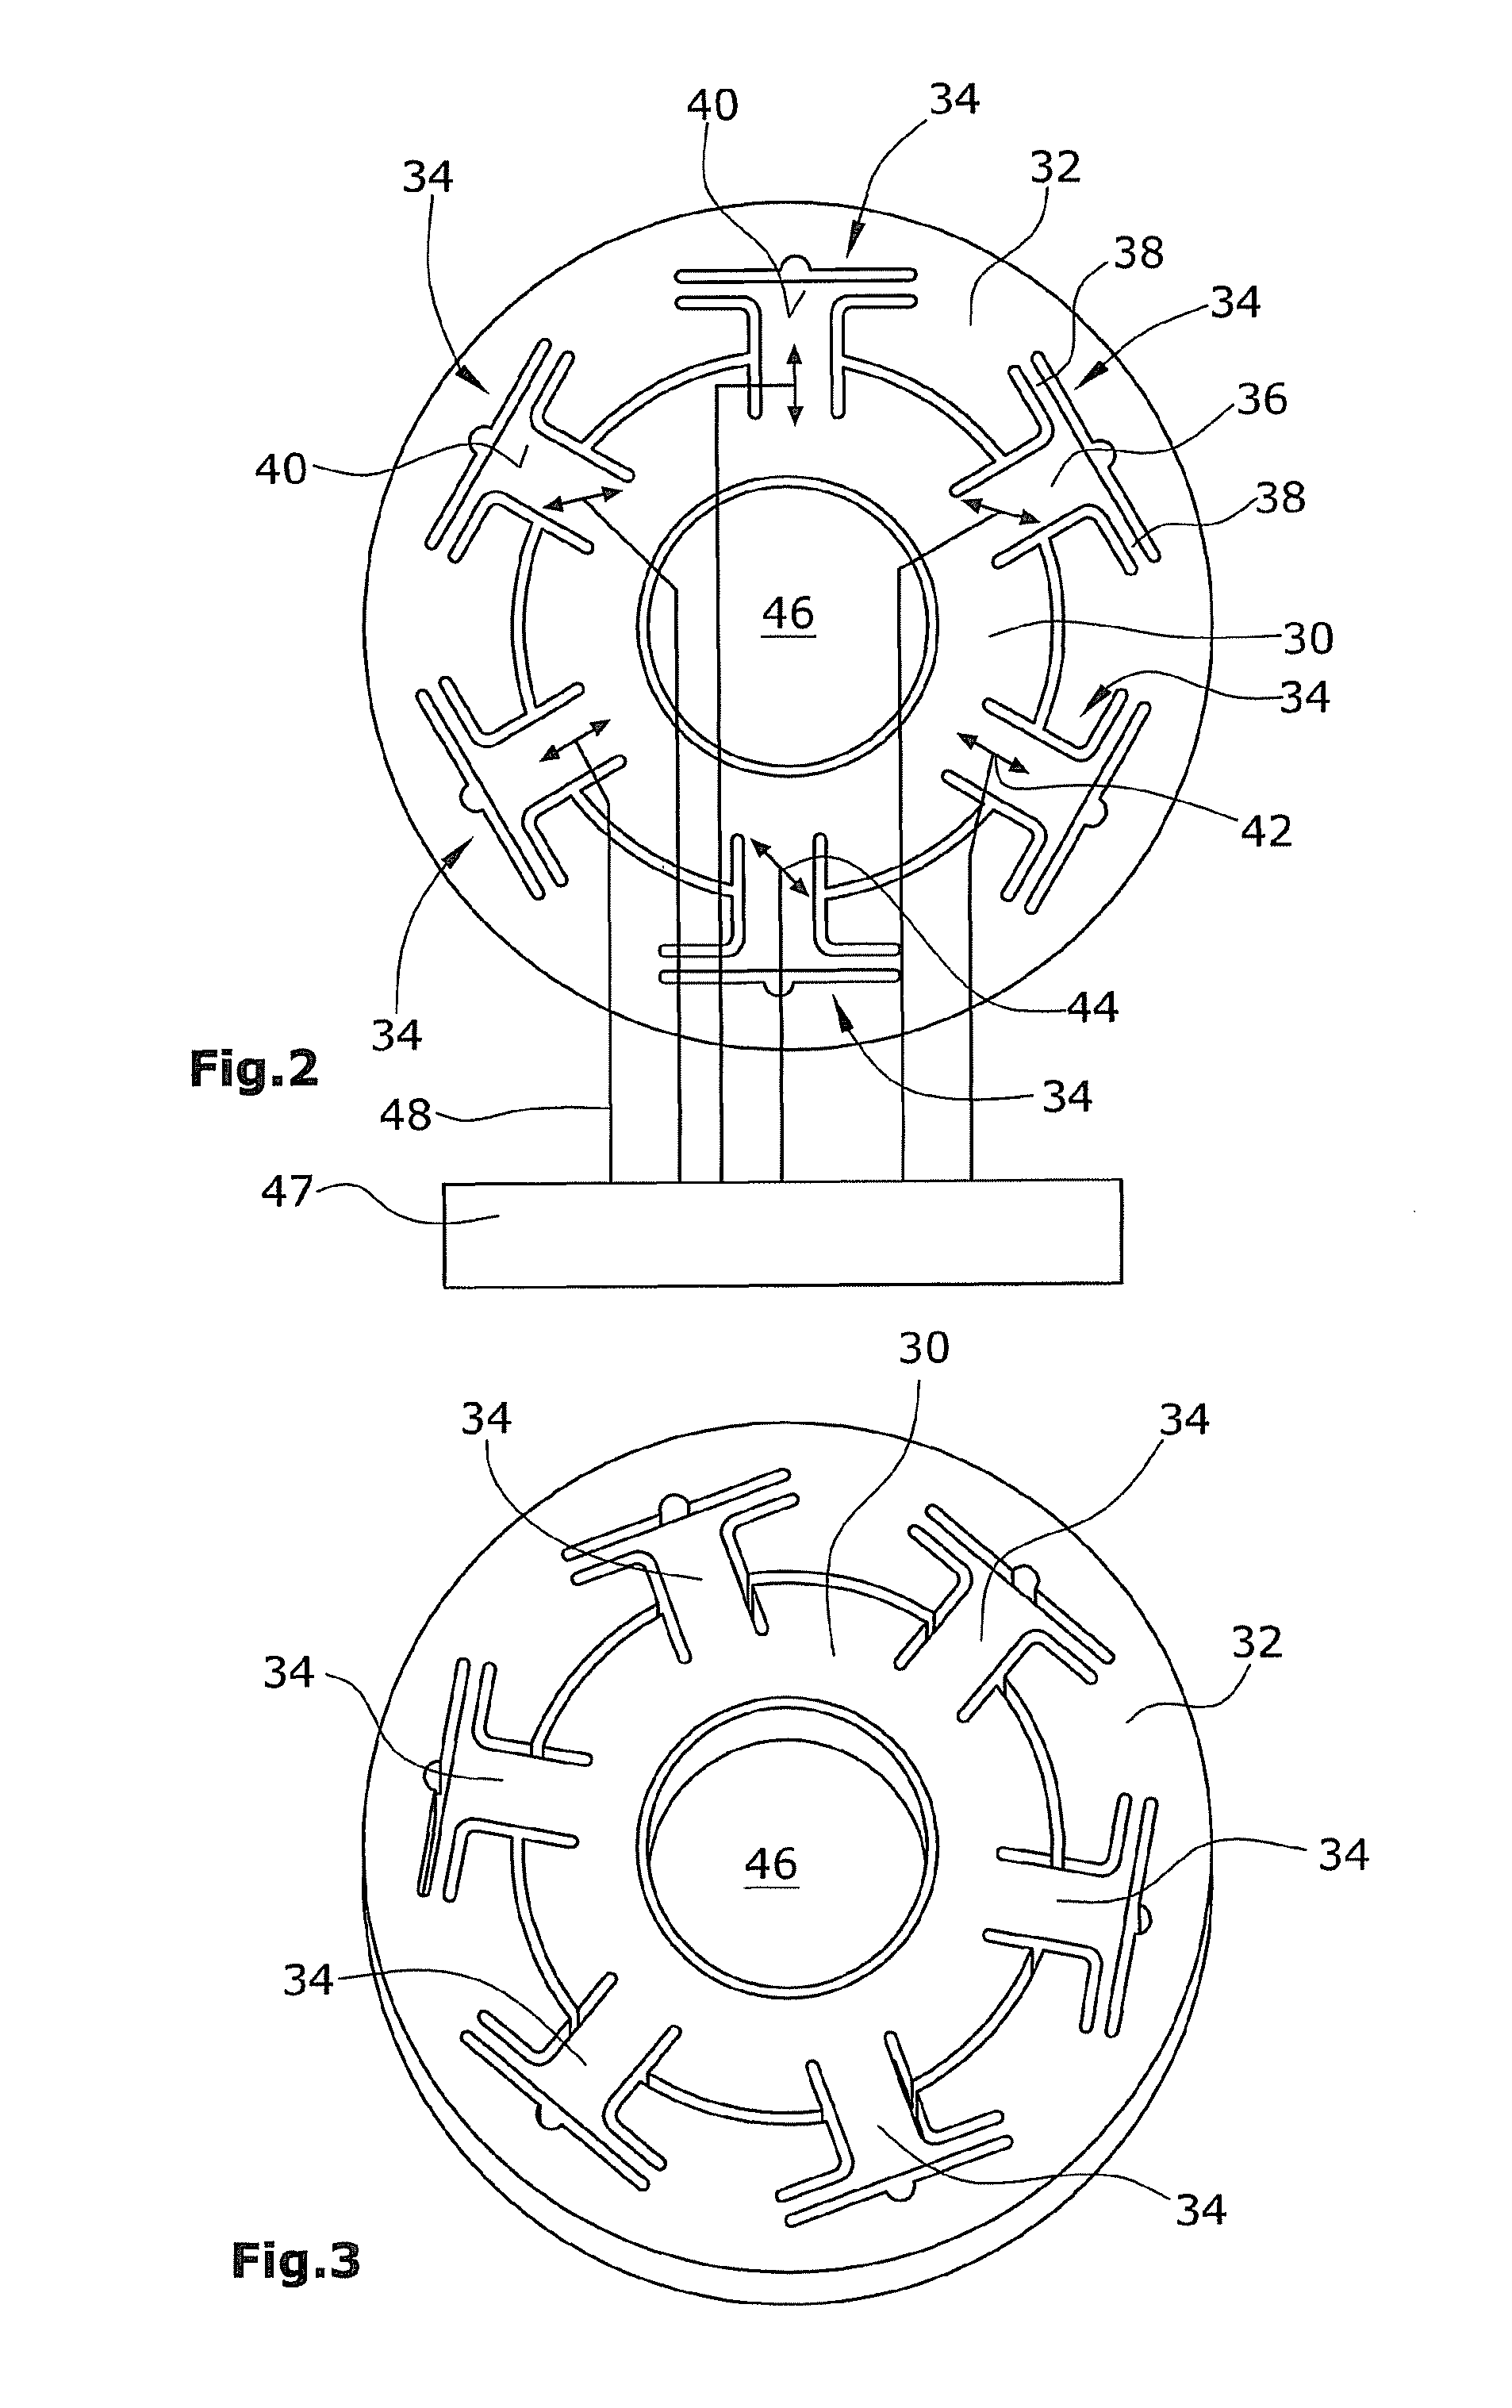 Force/moment sensor for measurement of forces and moments